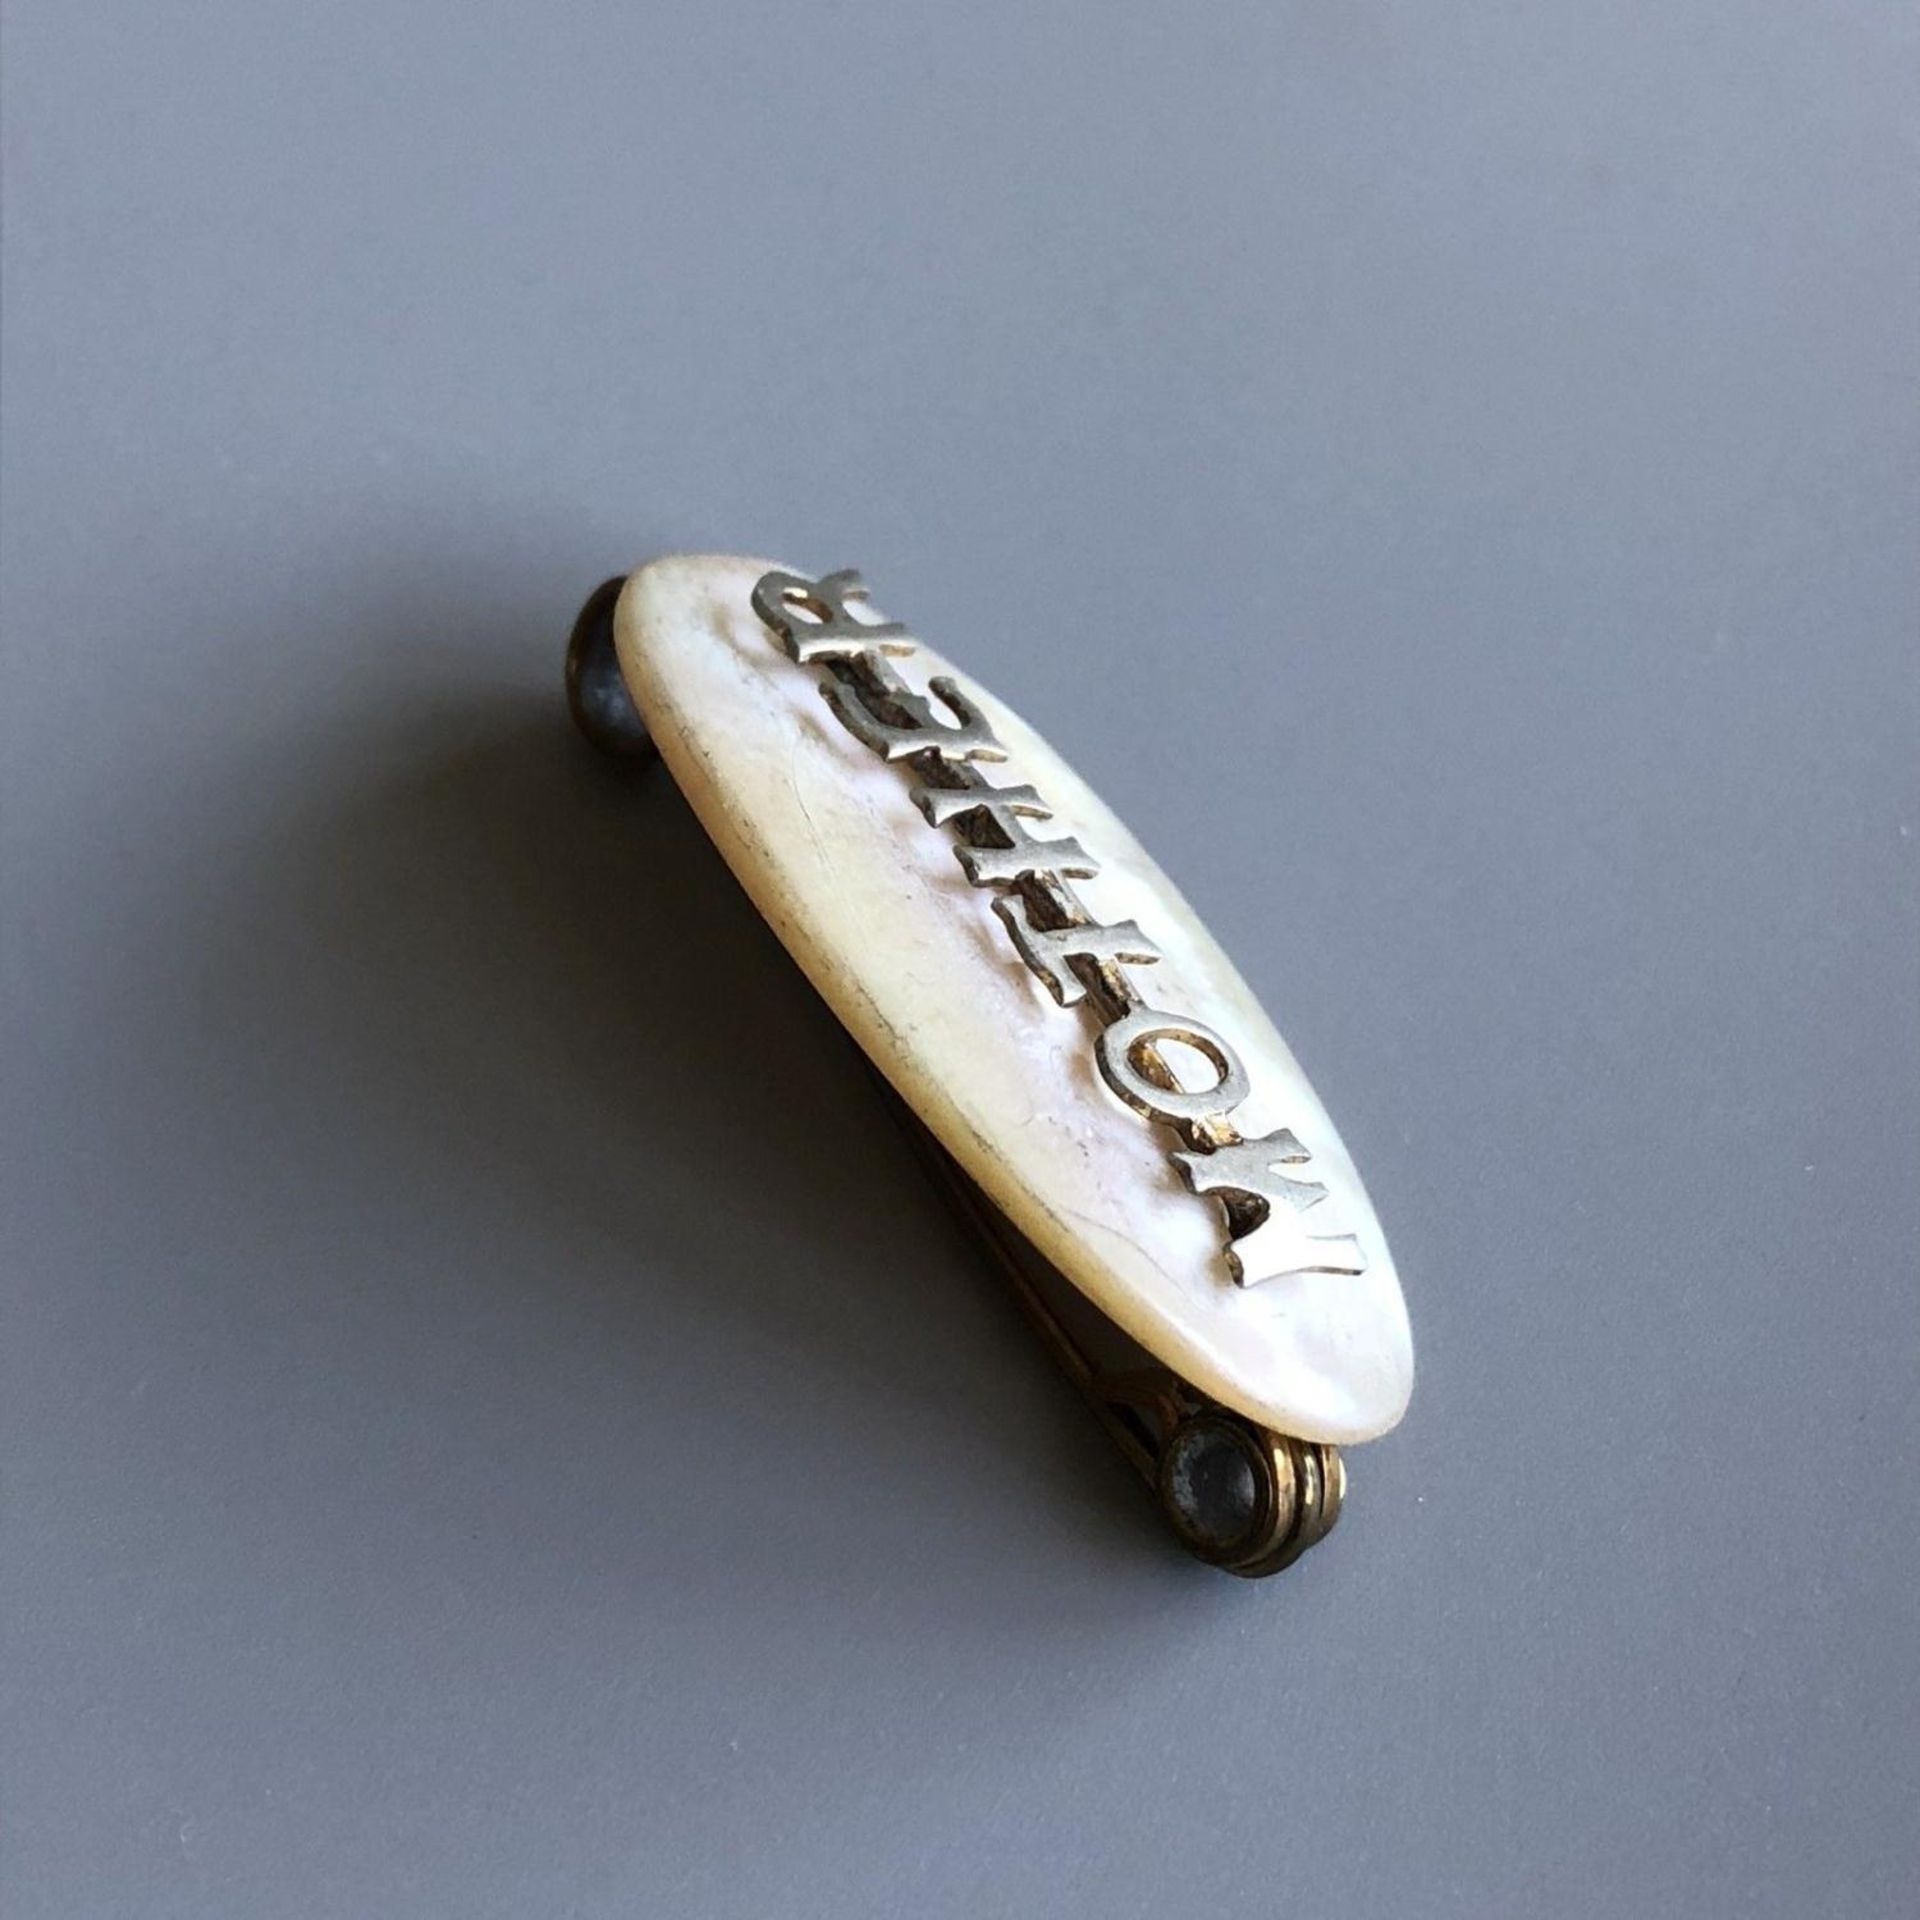 Original Antique Carved Mother of Pearl Oval Shell Gift for Mum Brooch - Image 2 of 3